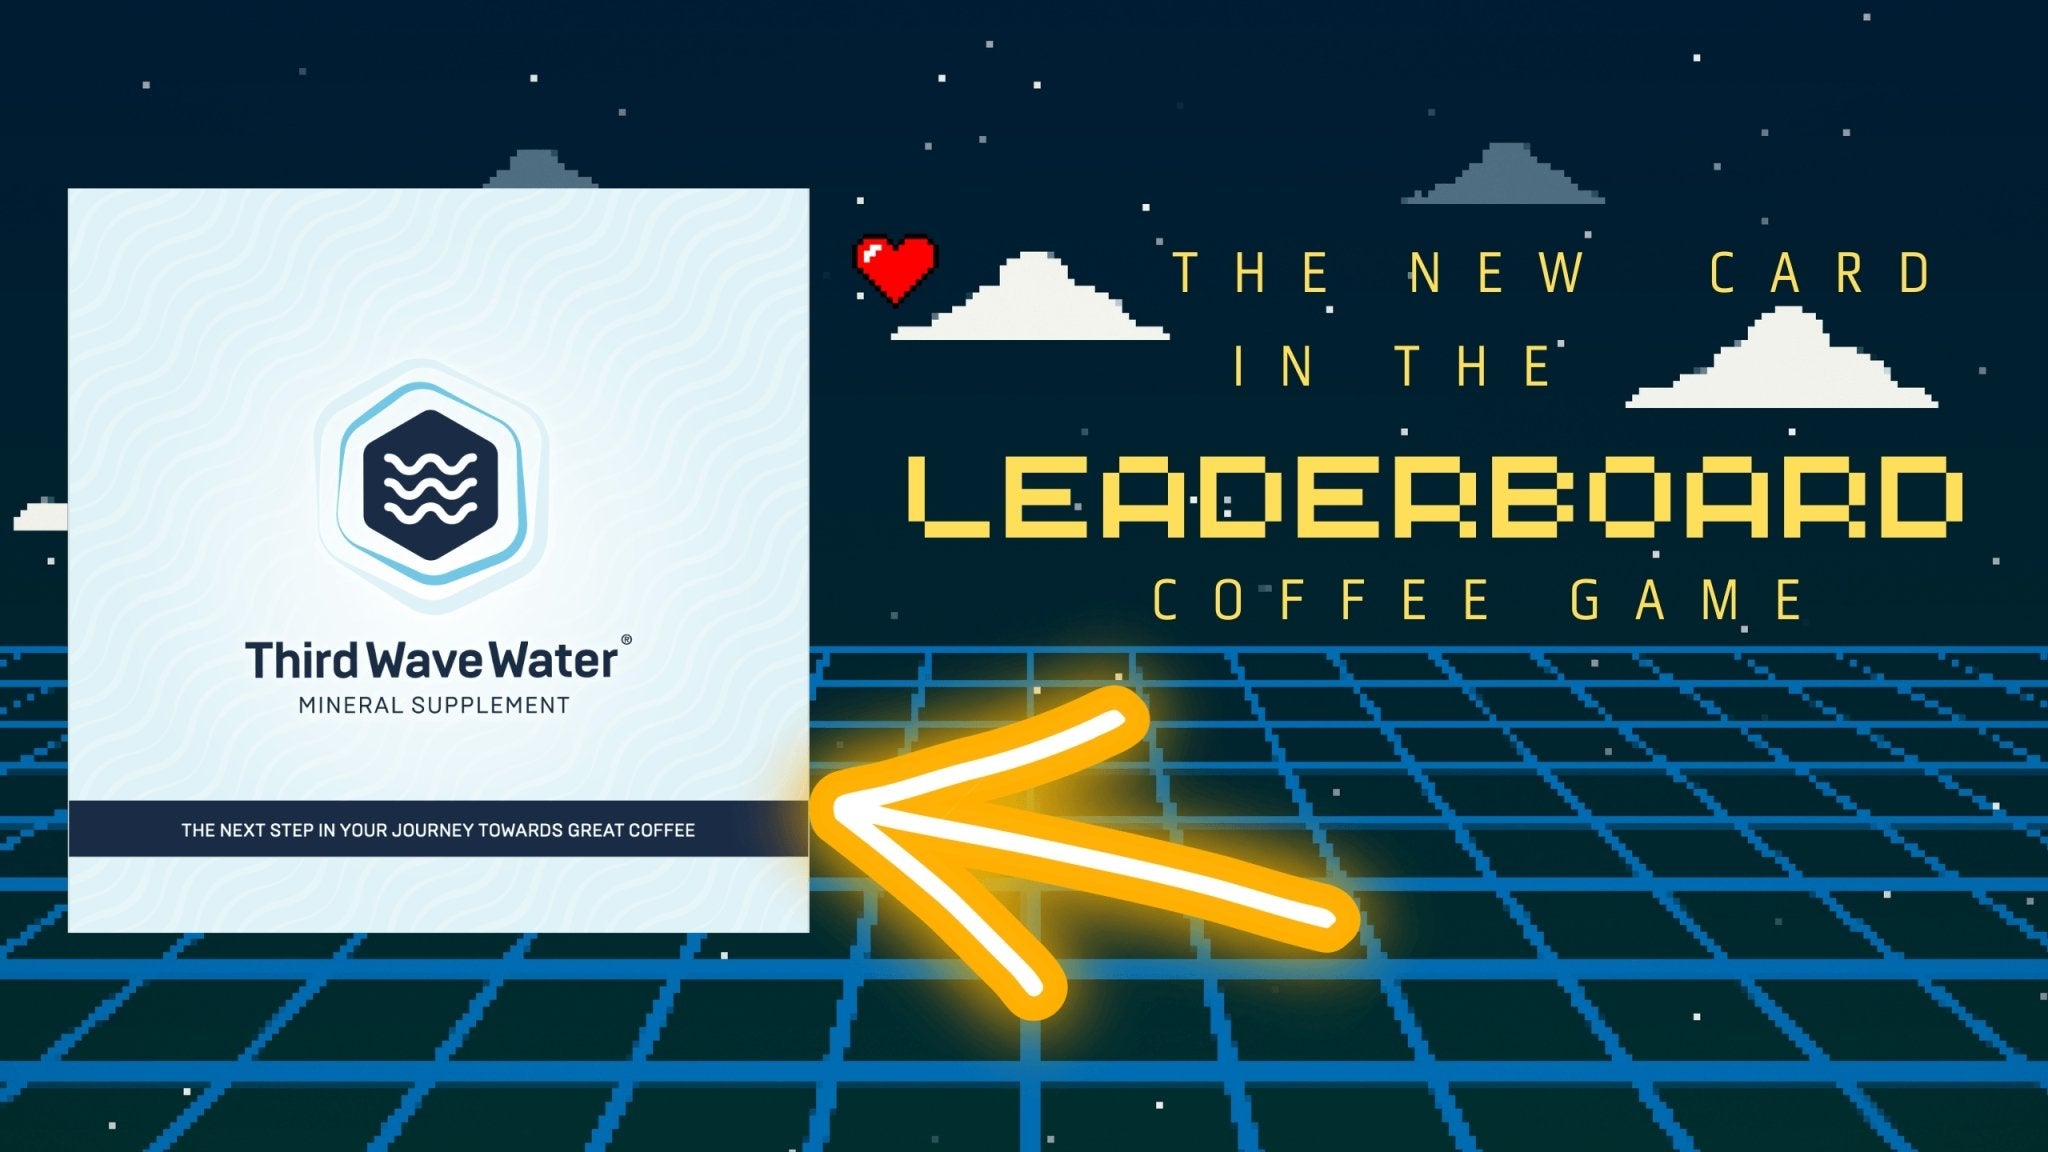 Leaderboard: The Coffee Game